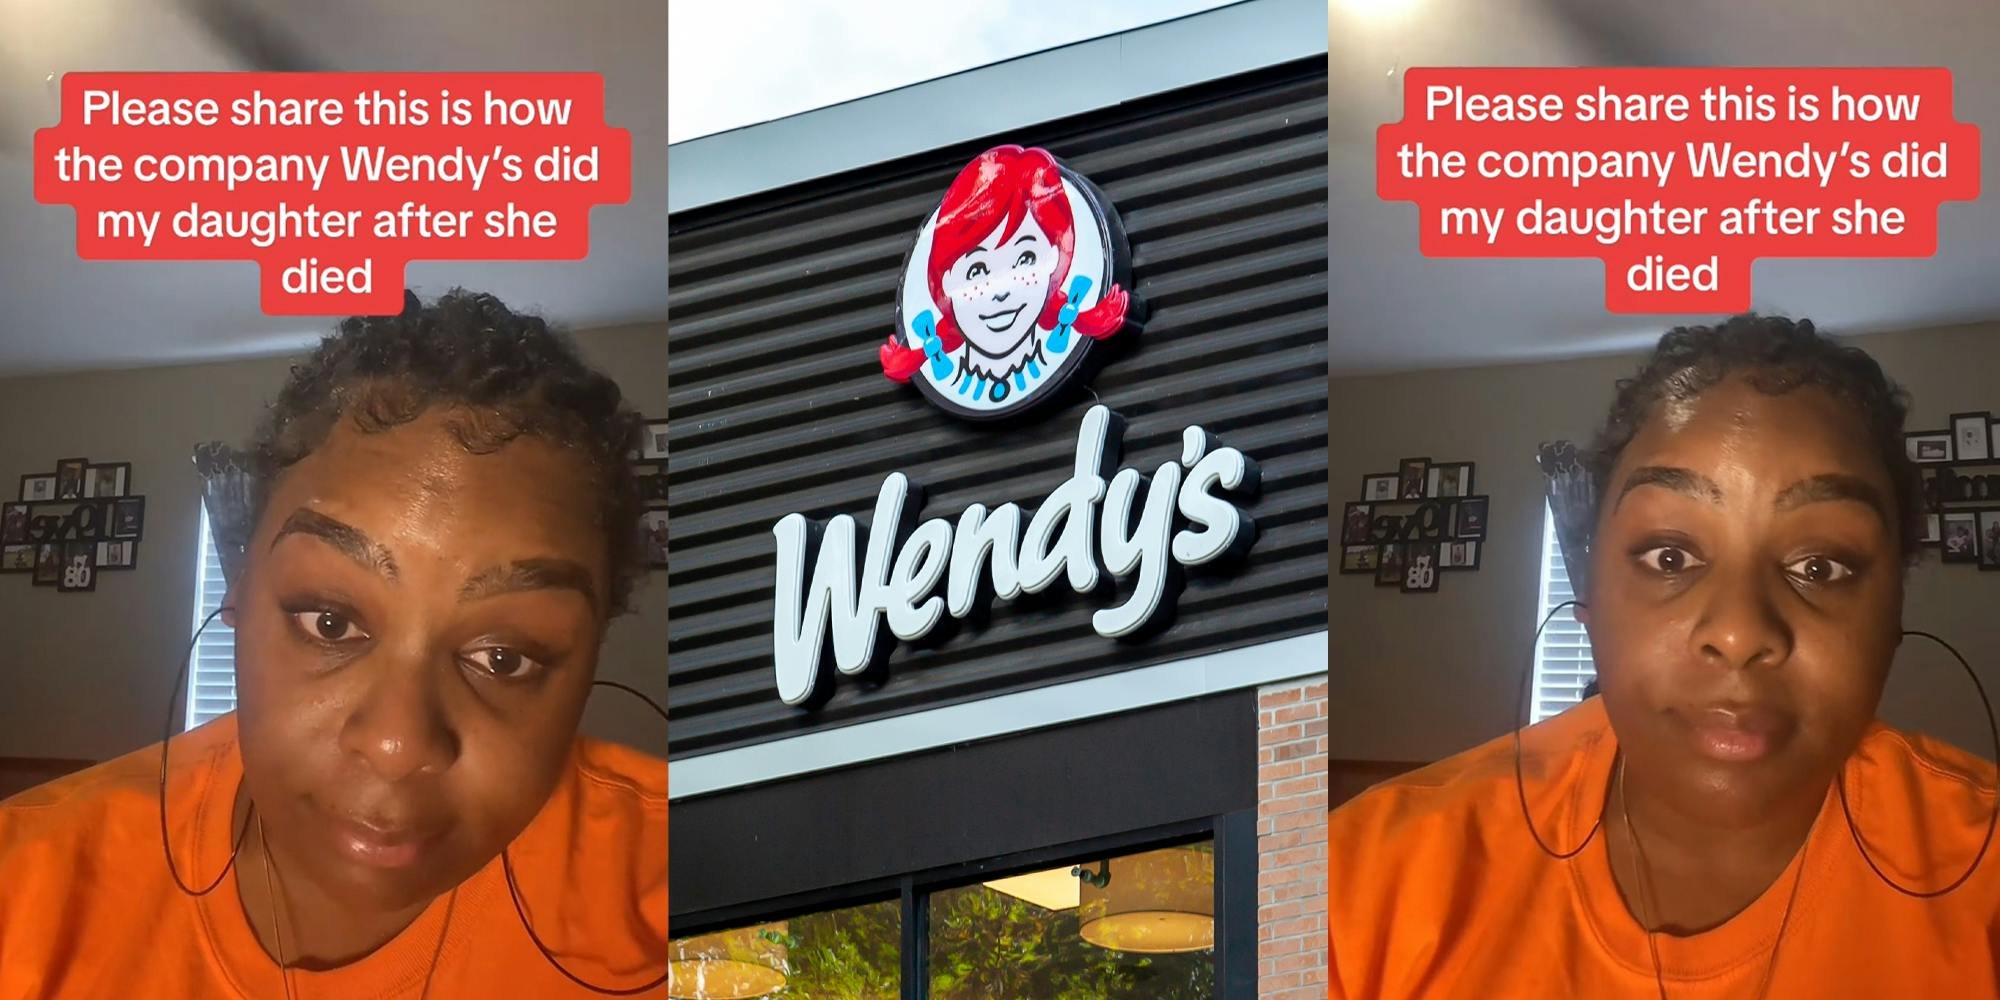 ‘Find out if she has my jacket because I need it back’: Wendy’s manager asks for jacket back after worker dies in car crash